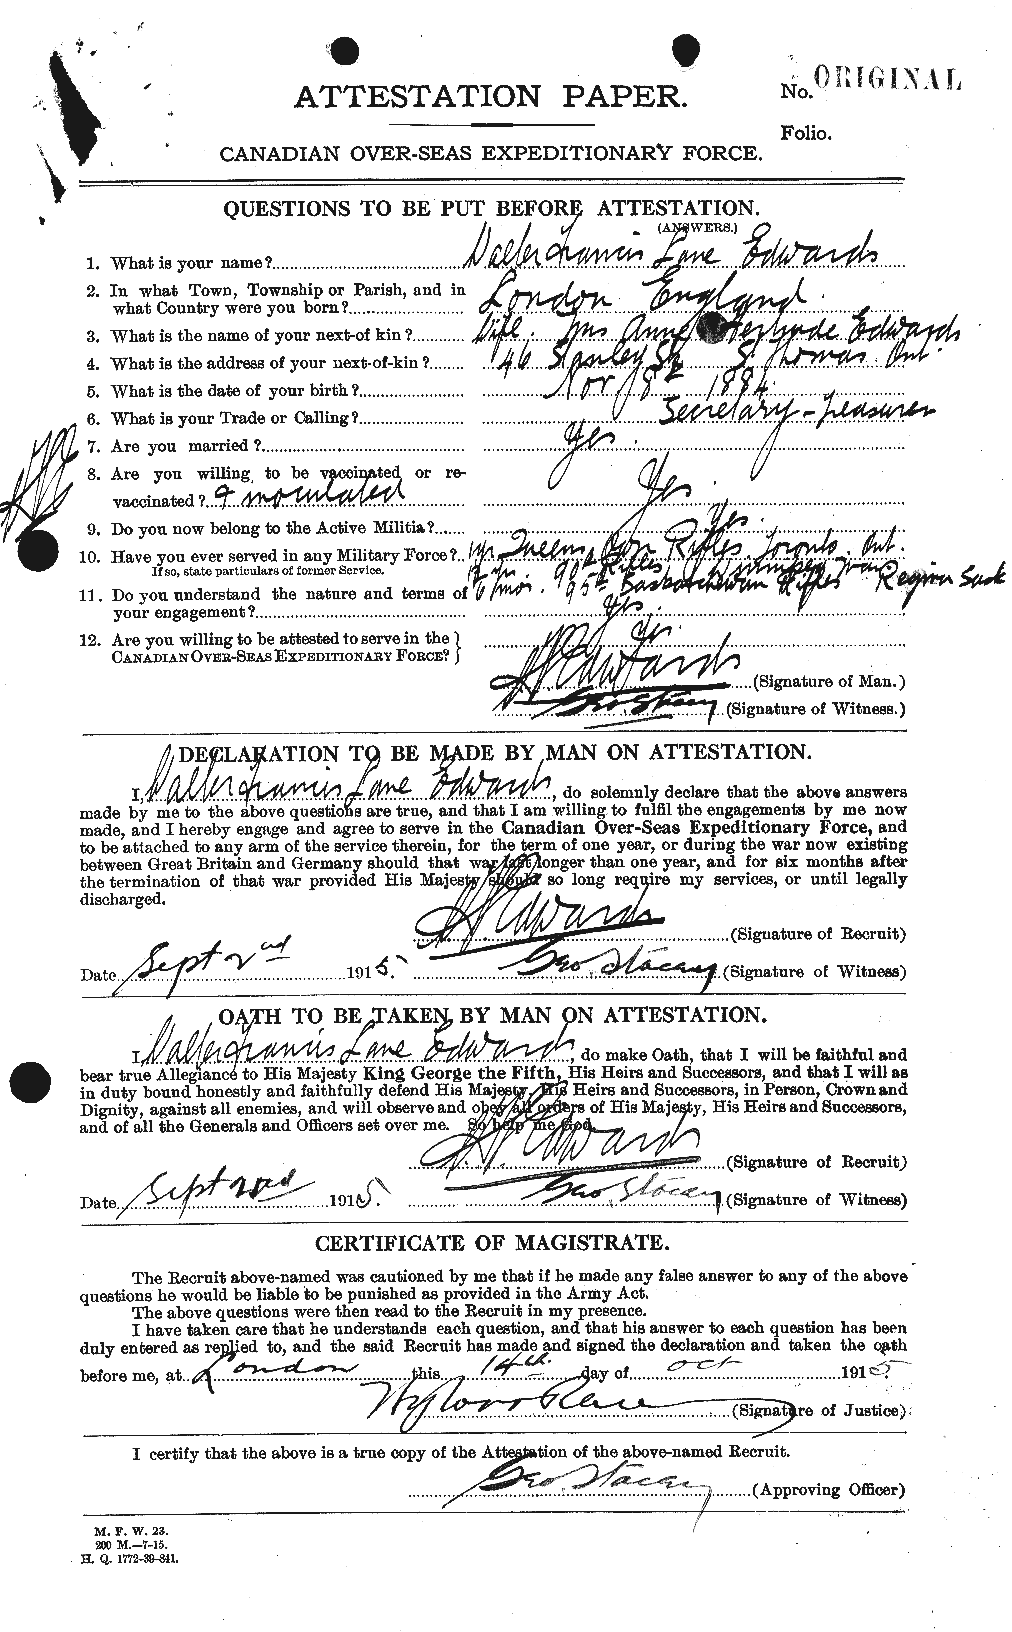 Personnel Records of the First World War - CEF 310370a